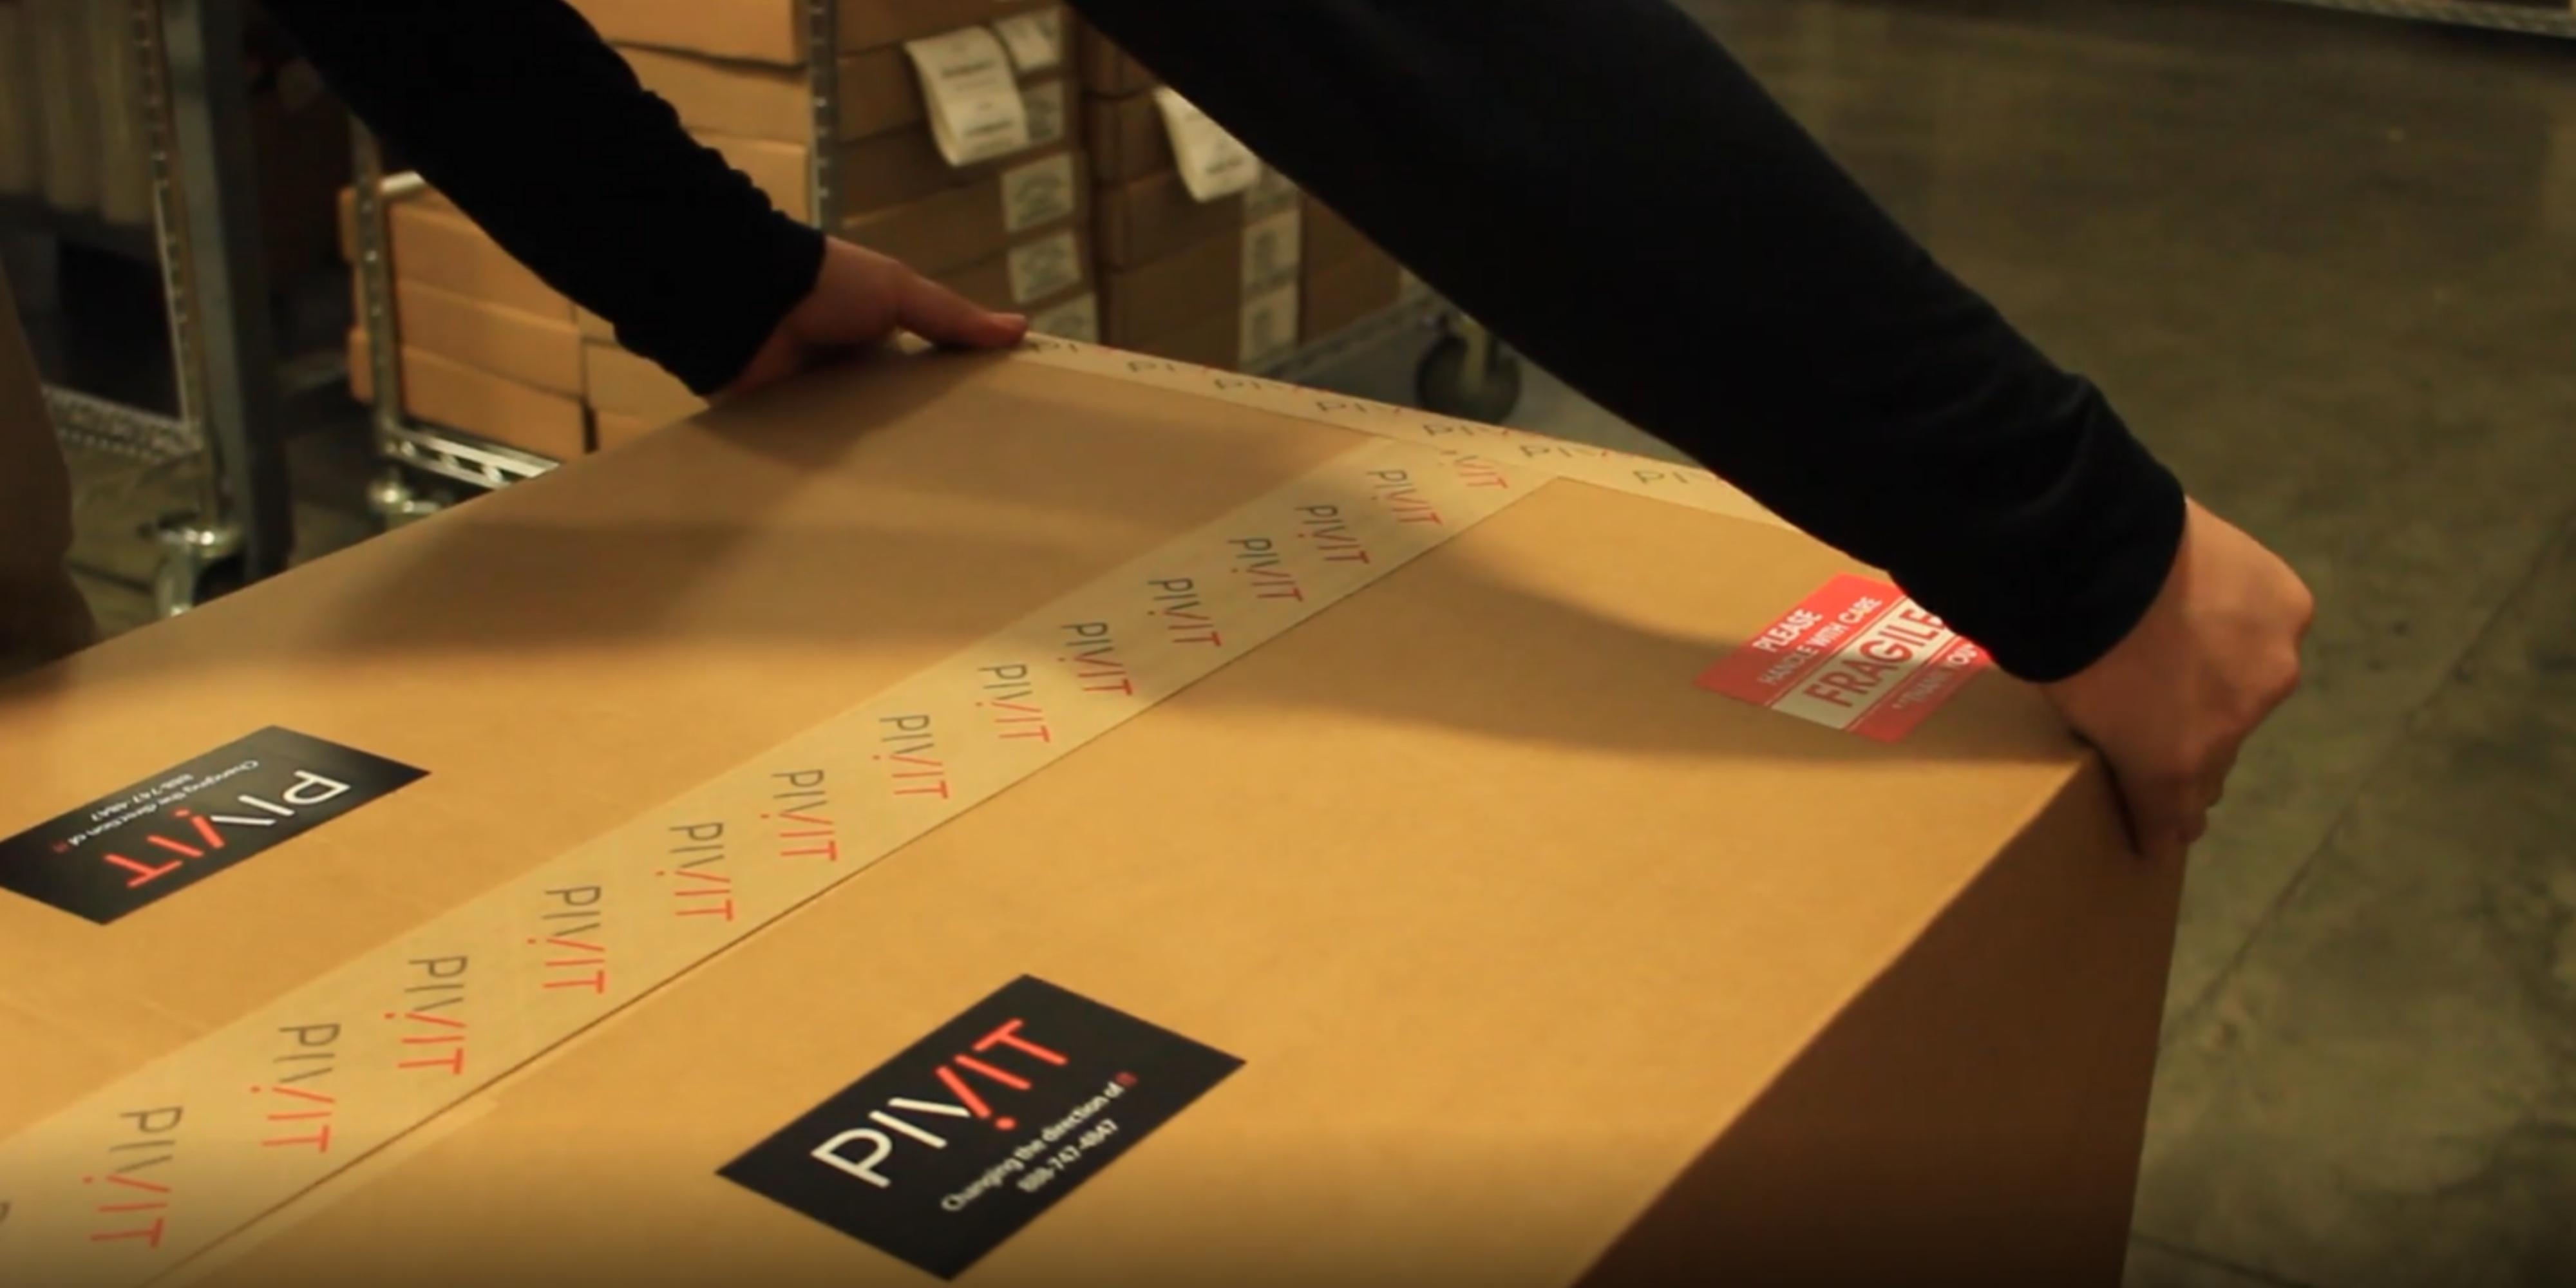 extend operations specialist applying tape to a package